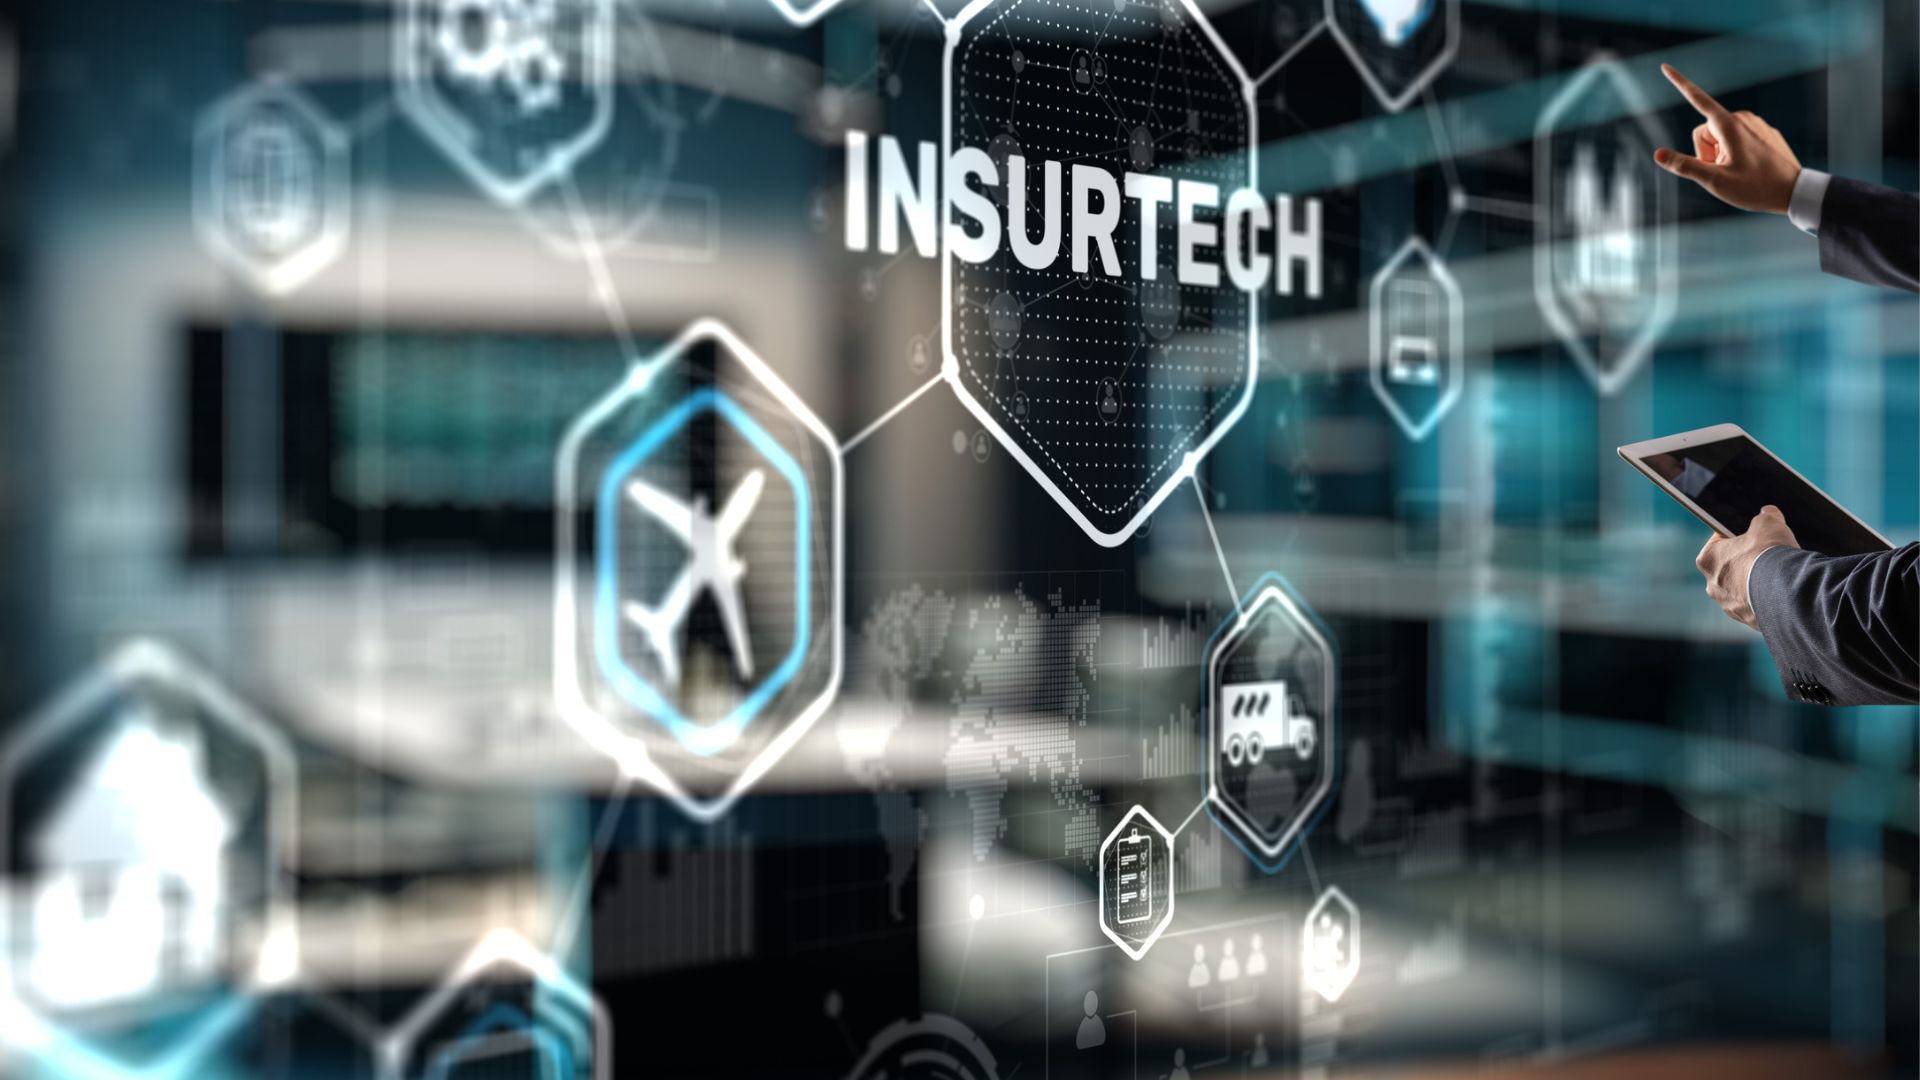 Man points to Insurtech graphic